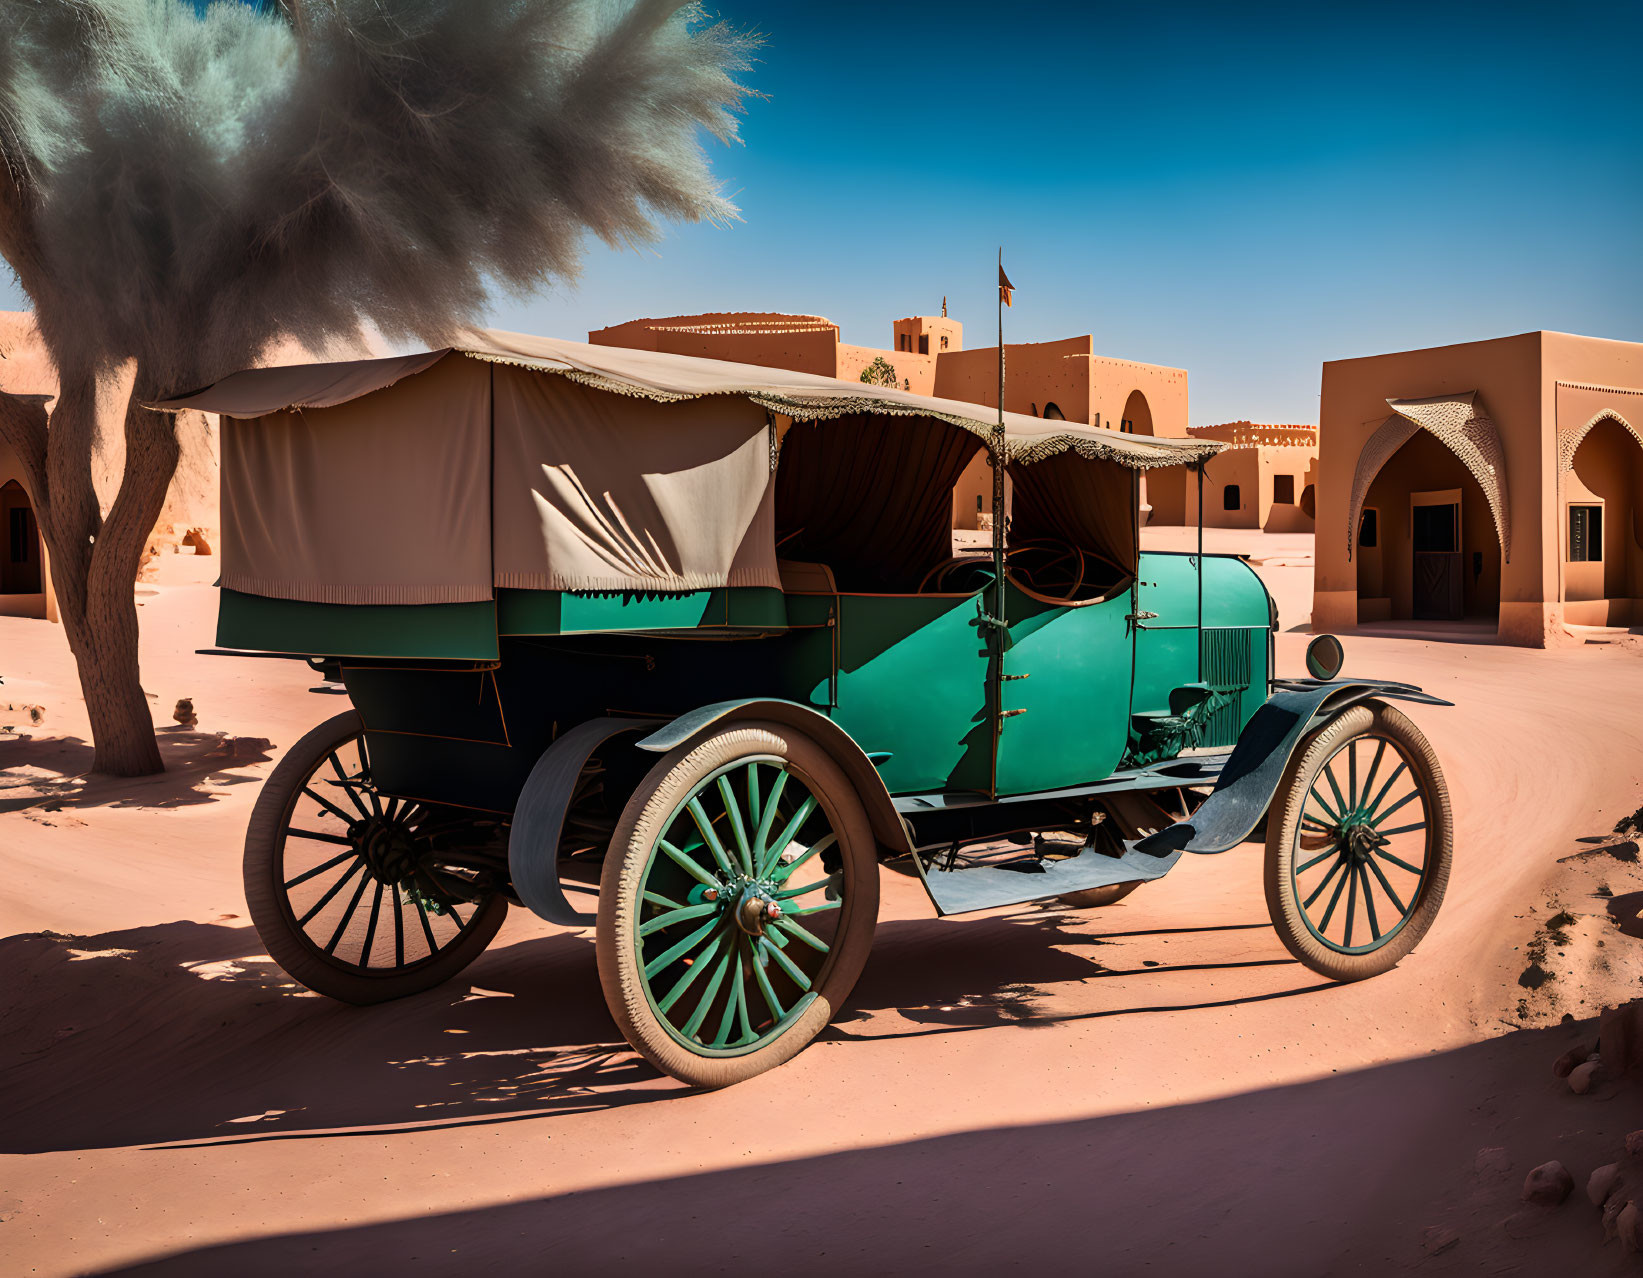 Vintage Green Wagon with White Canopy in Desert Setting